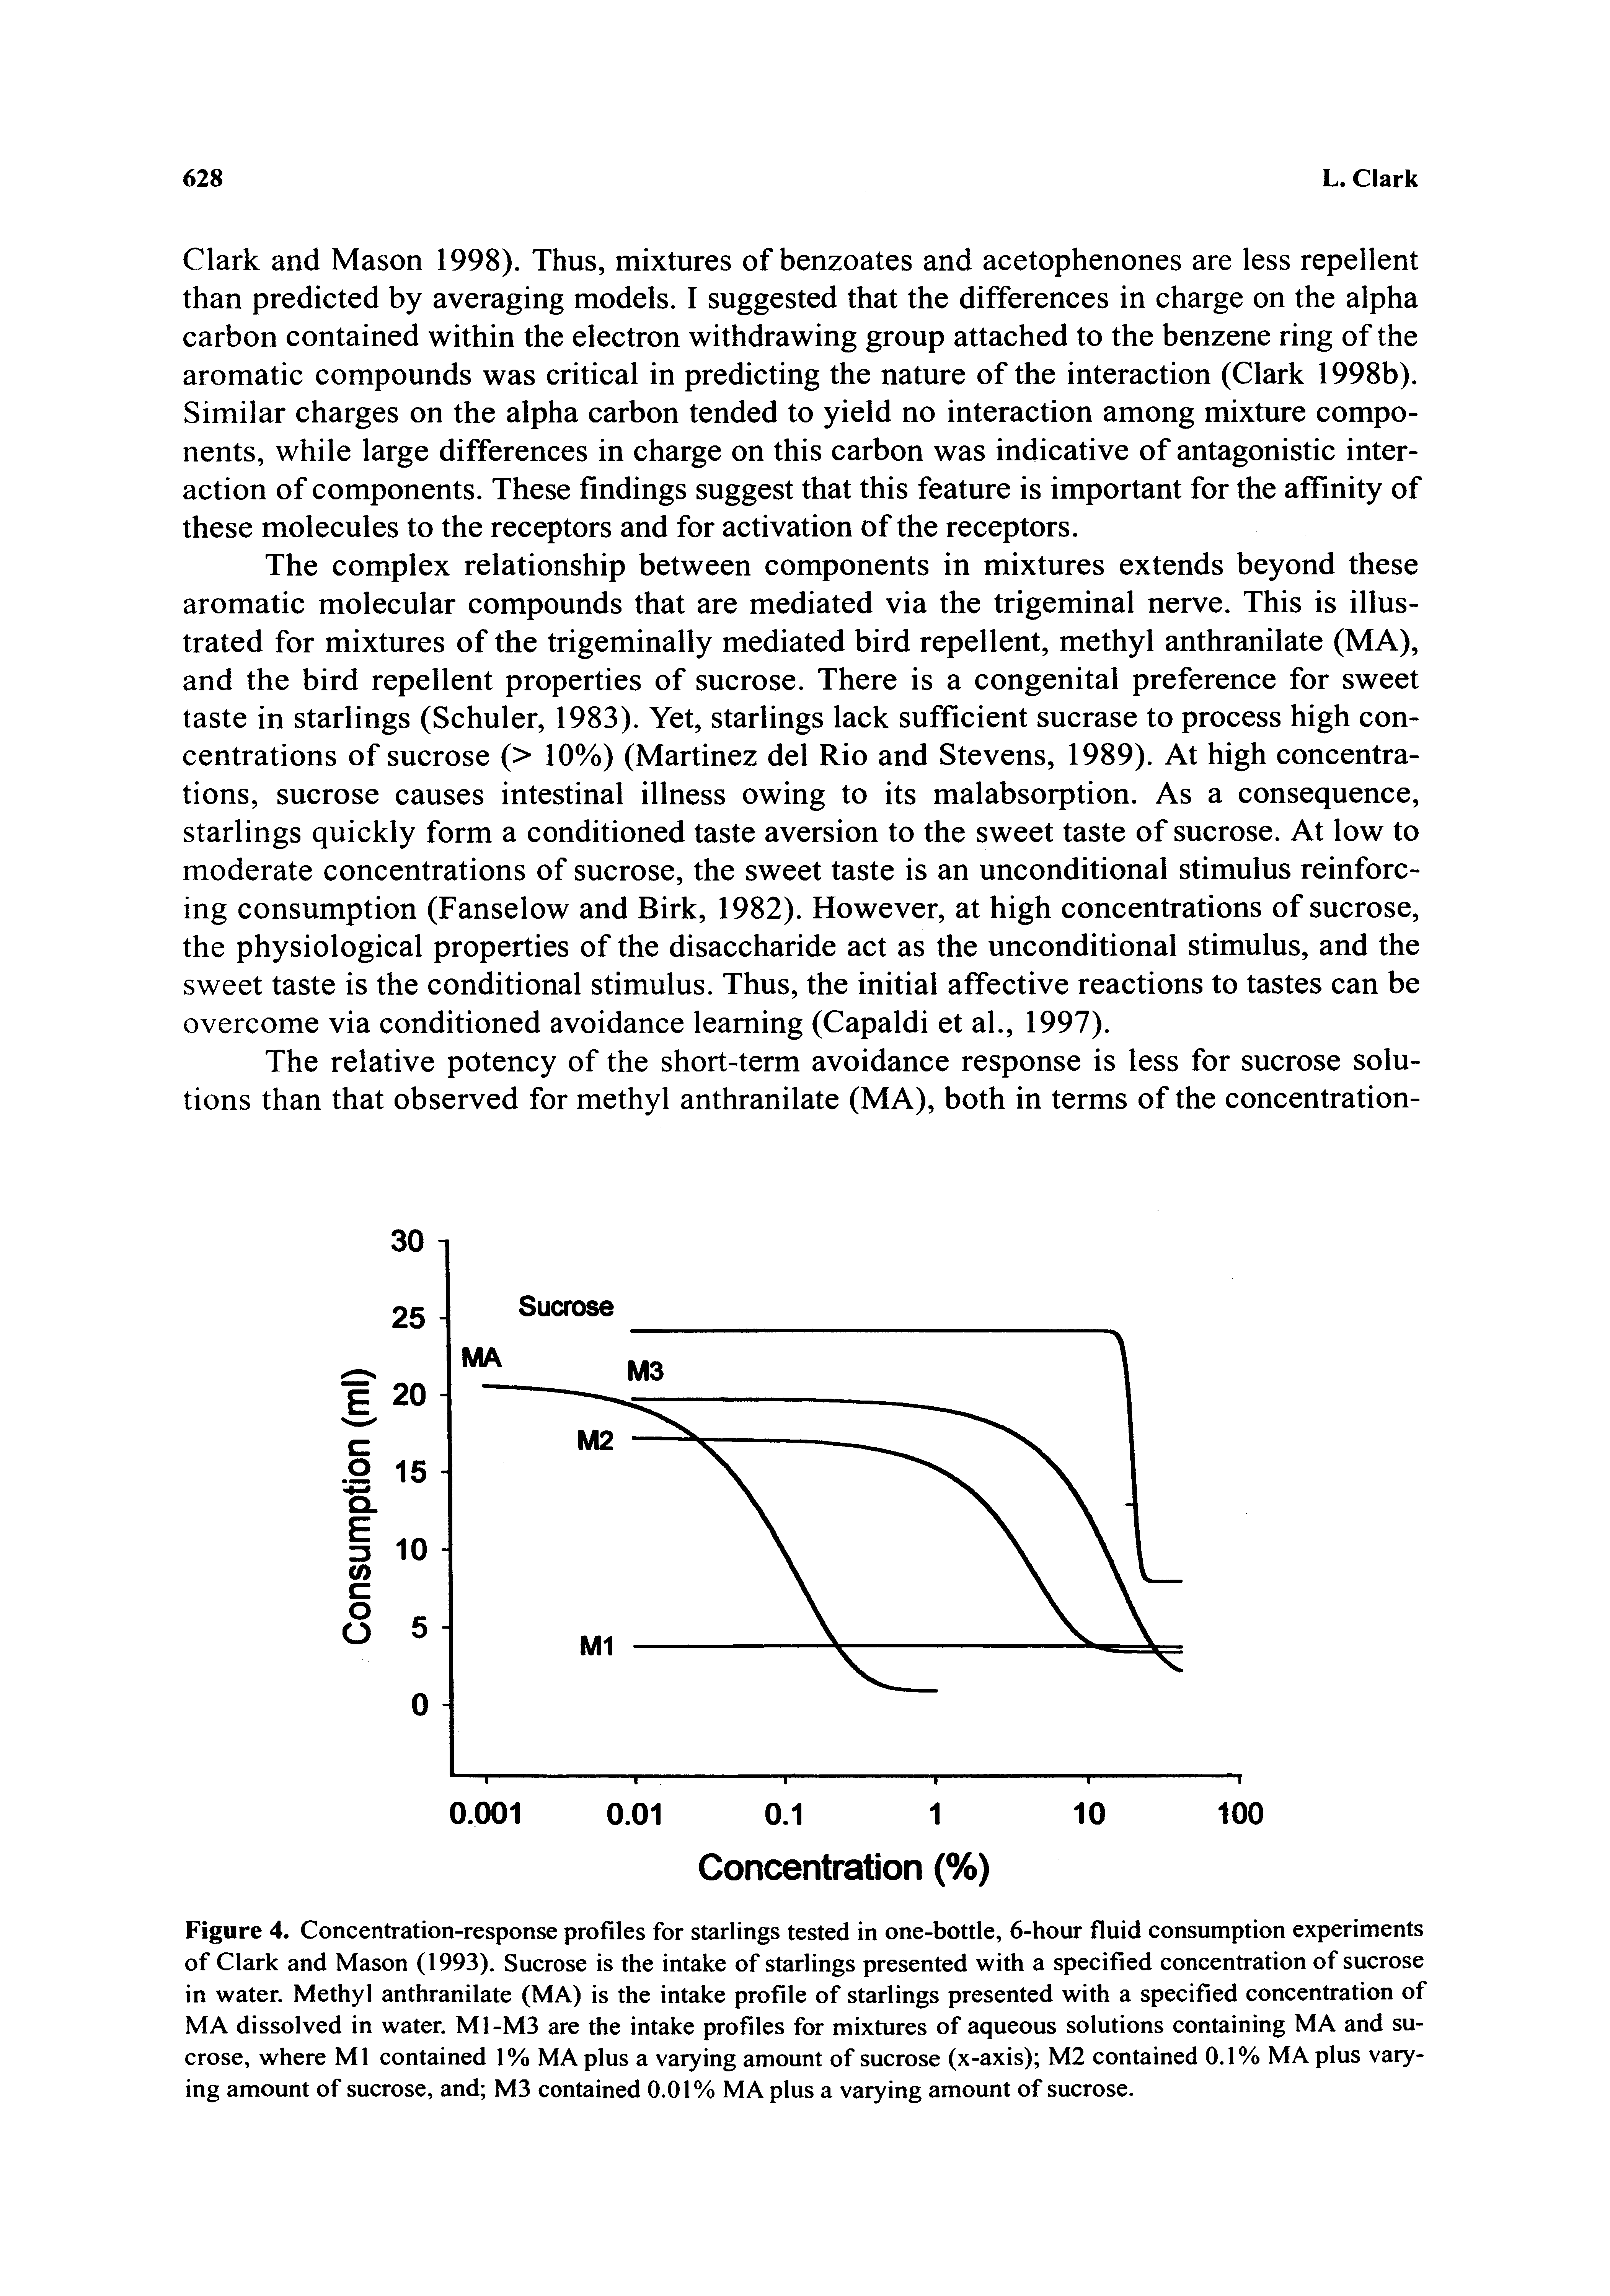 Figure 4. Concentration-response profiles for starlings tested in one-bottle, 6-hour fluid consumption experiments of Clark and Mason (1993). Sucrose is the intake of starlings presented with a specified concentration of sucrose in water. Methyl anthranilate (MA) is the intake profile of starlings presented with a specified concentration of MA dissolved in water. Ml-M3 are the intake profiles for mixtures of aqueous solutions containing MA and sucrose, where Ml contained 1% MAplus a varying amount of sucrose (x-axis) M2 contained 0.1% MA plus varying amount of sucrose, and M3 contained 0.01% MA plus a varying amount of sucrose.